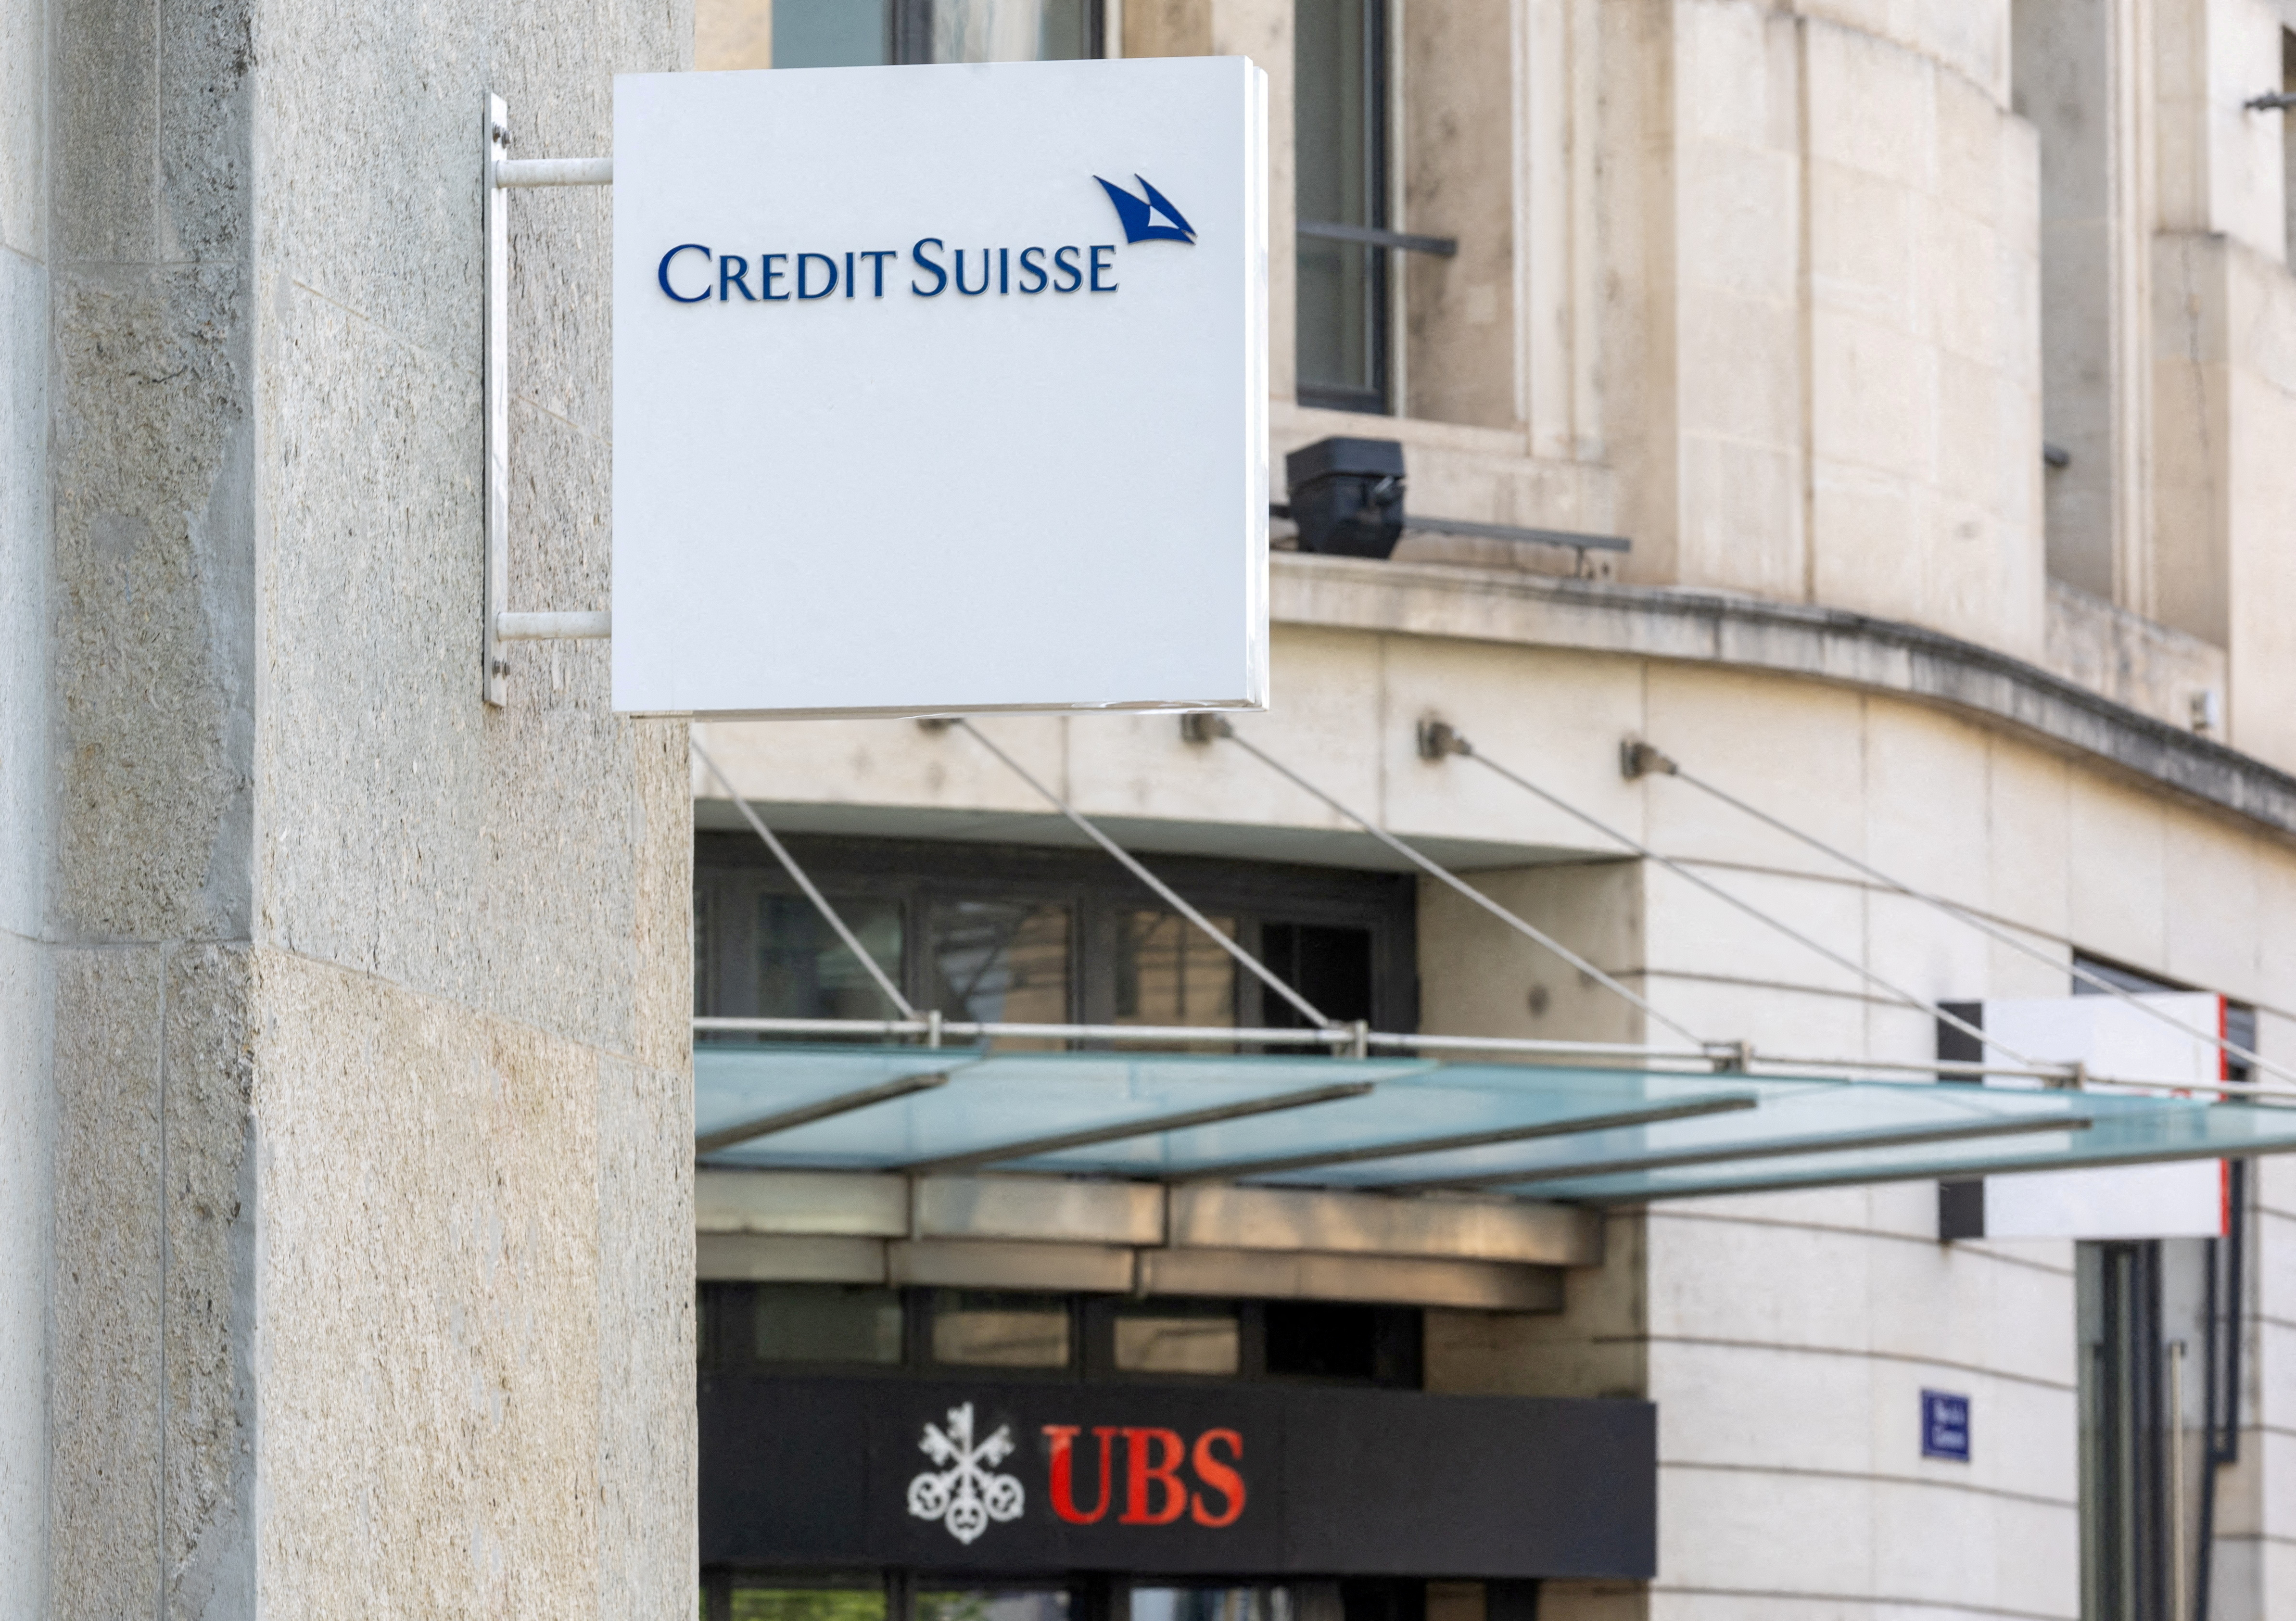 The logos of Swiss bank Credit Suisse and UBS are seen in Geneva, Switzerland